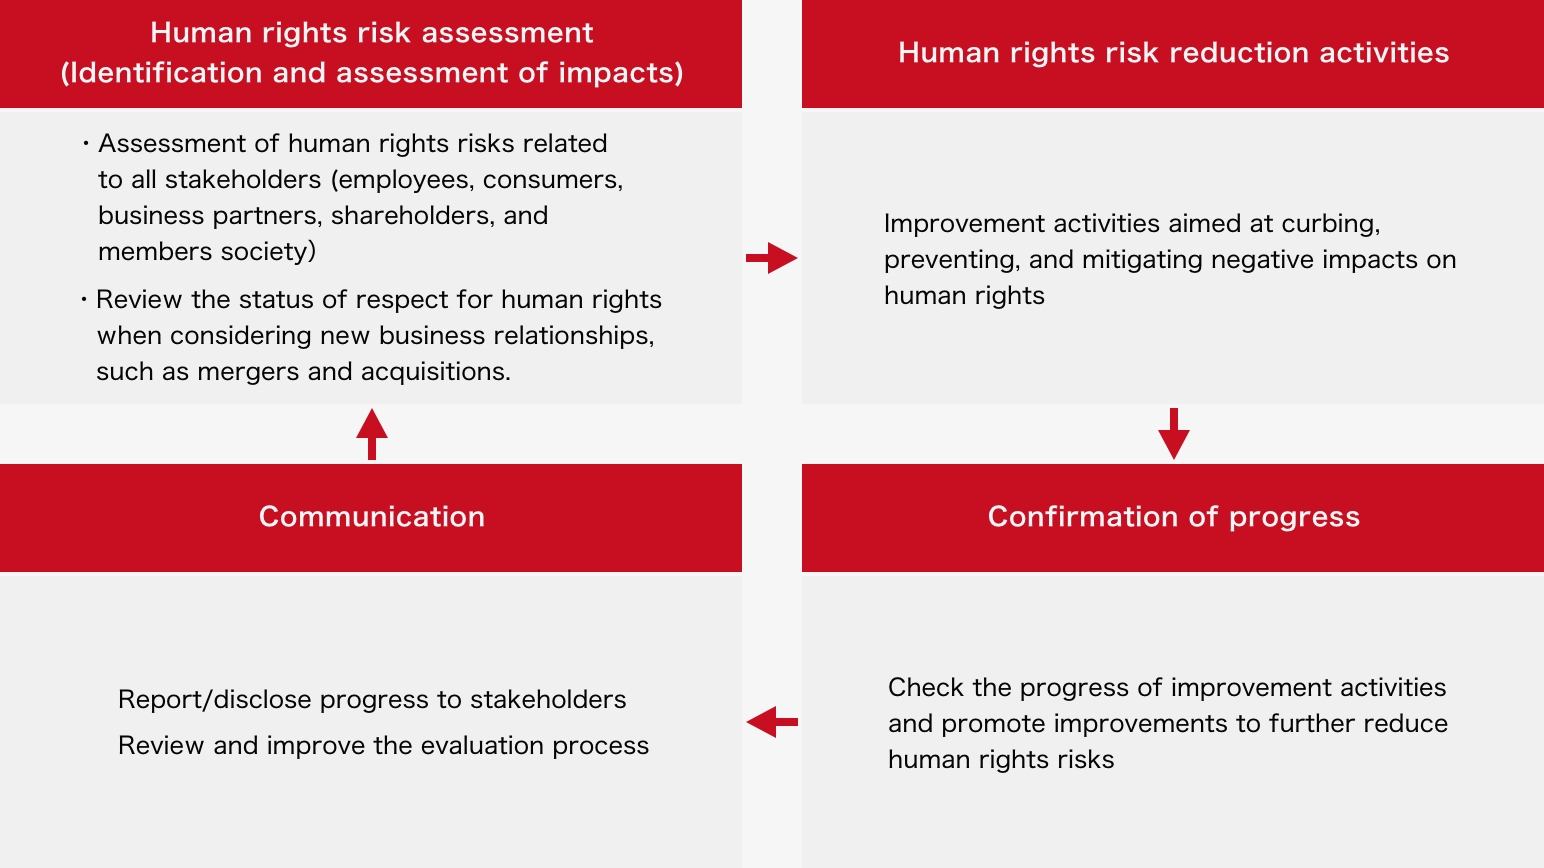 Human Rights Due Diligence